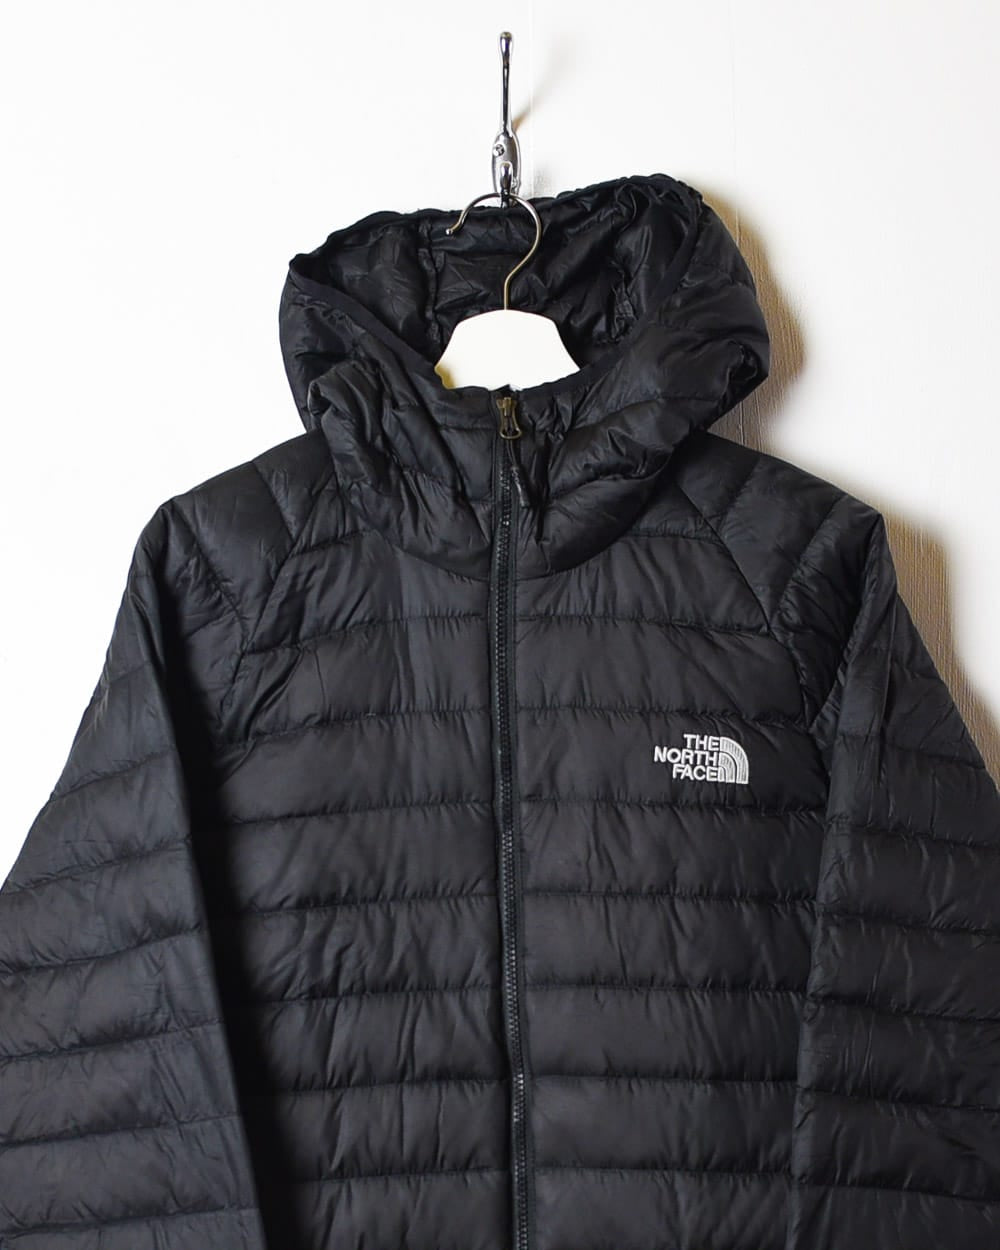 Black The North Face 800 High Neck Hooded Puffer Jacket - Medium